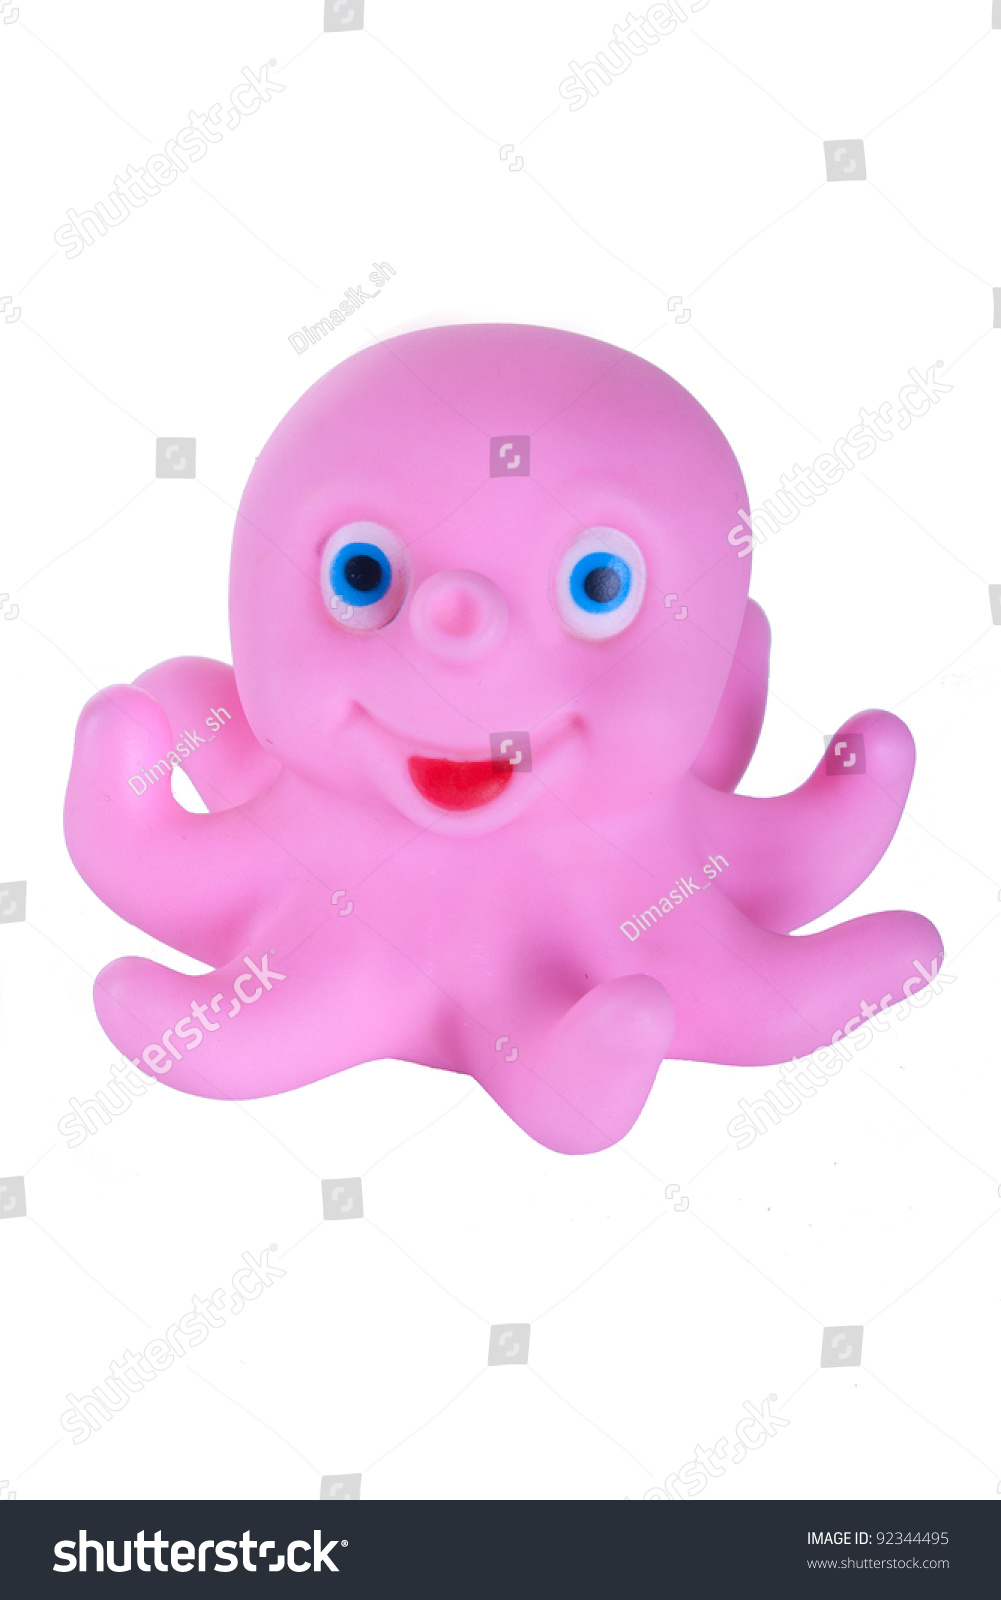 Pink Rubber Octopus Toy Stock Photo 92344495 - Shutterstock